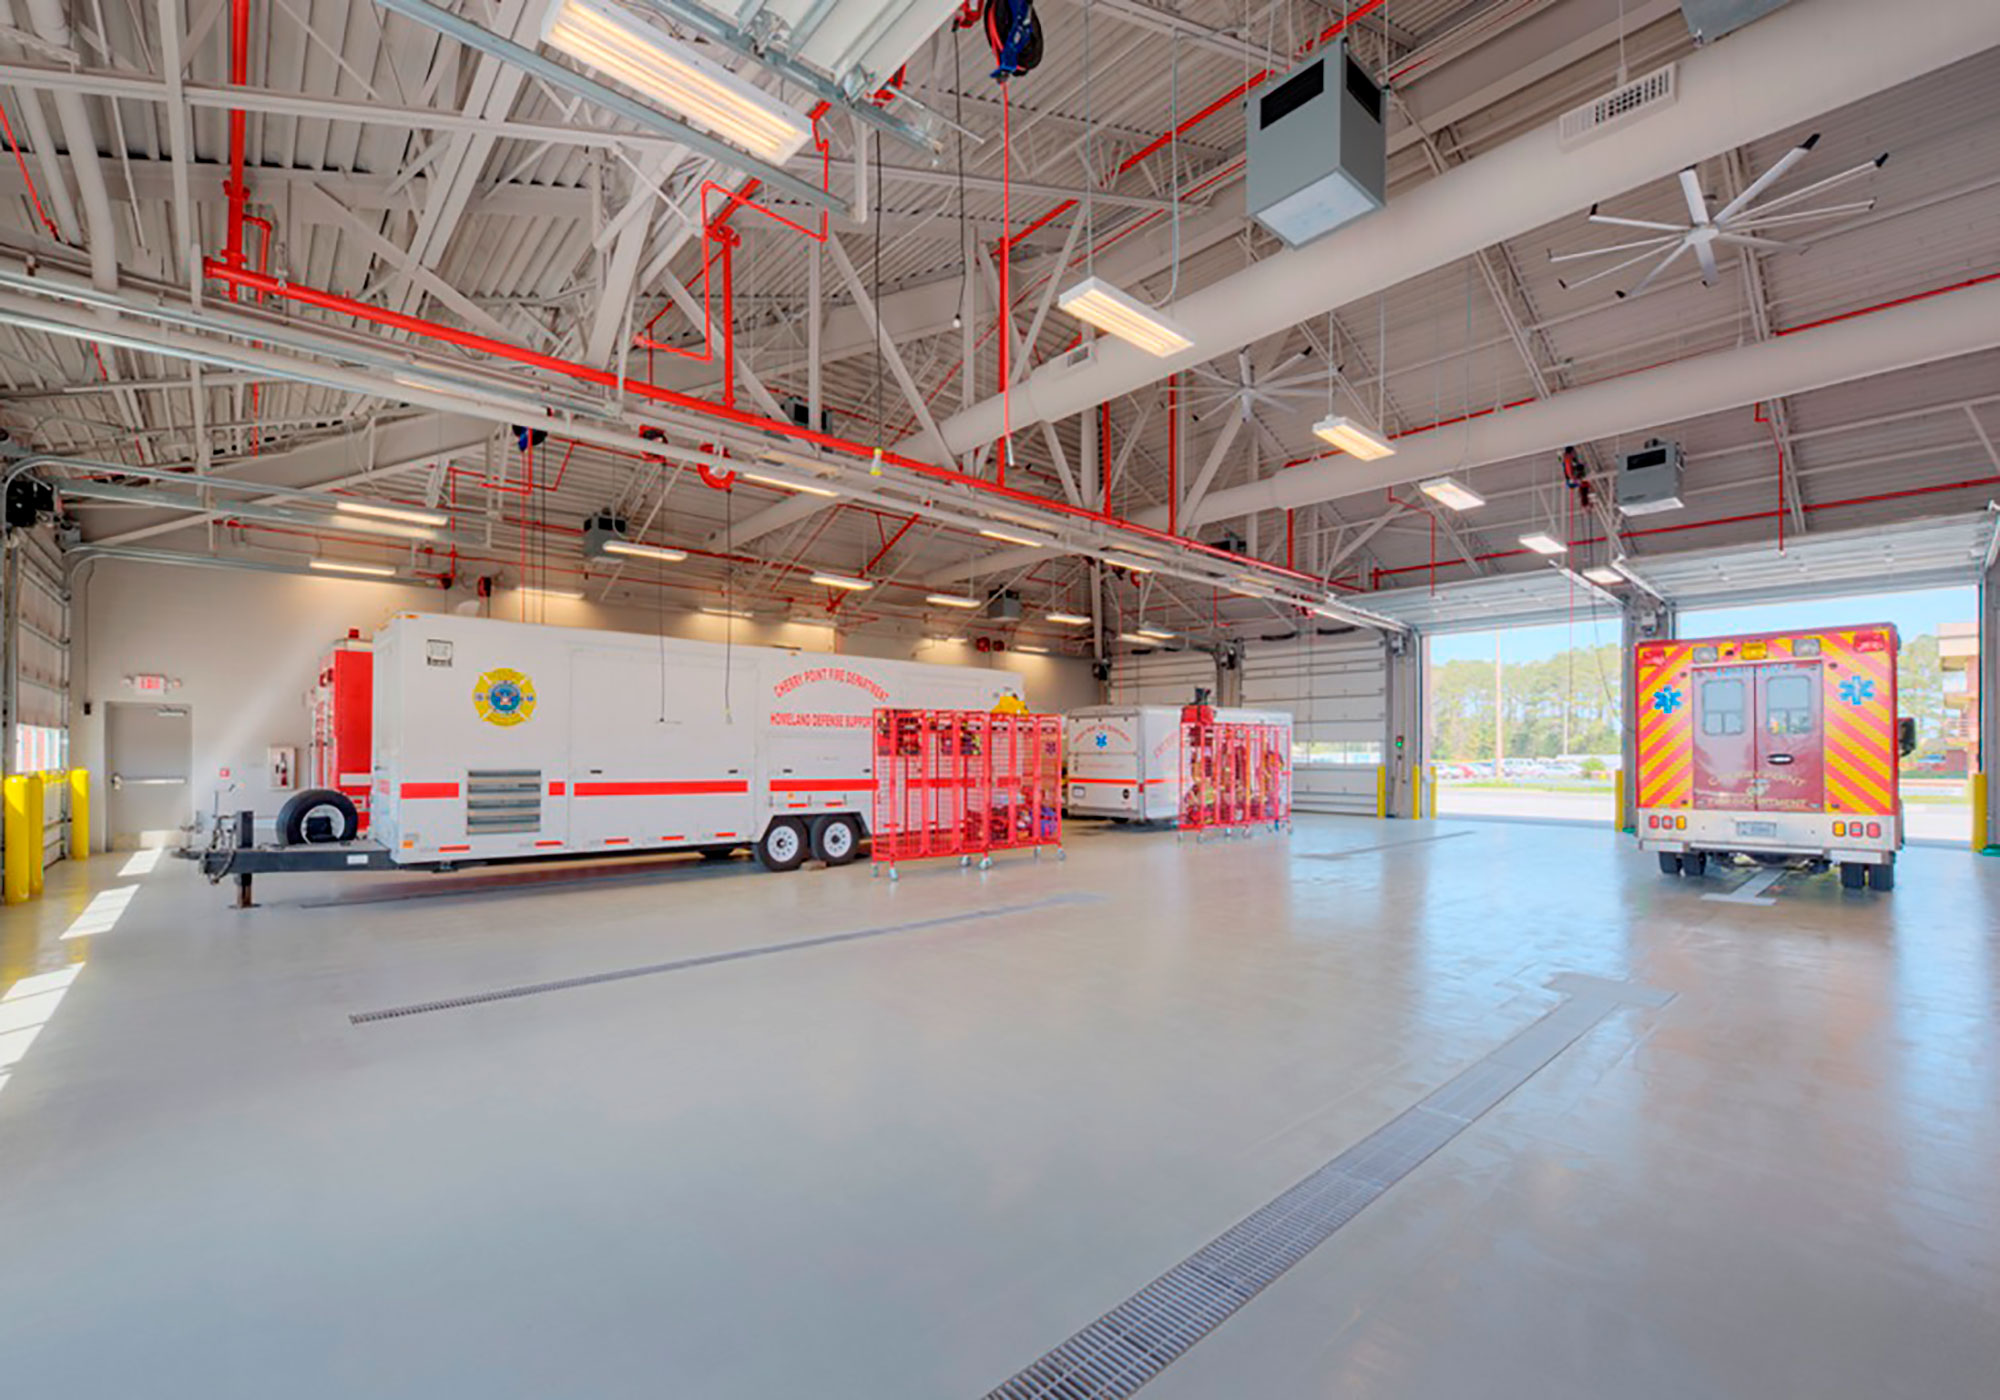 Cherry Point MCAS EMS & Fire Vehicle Facility